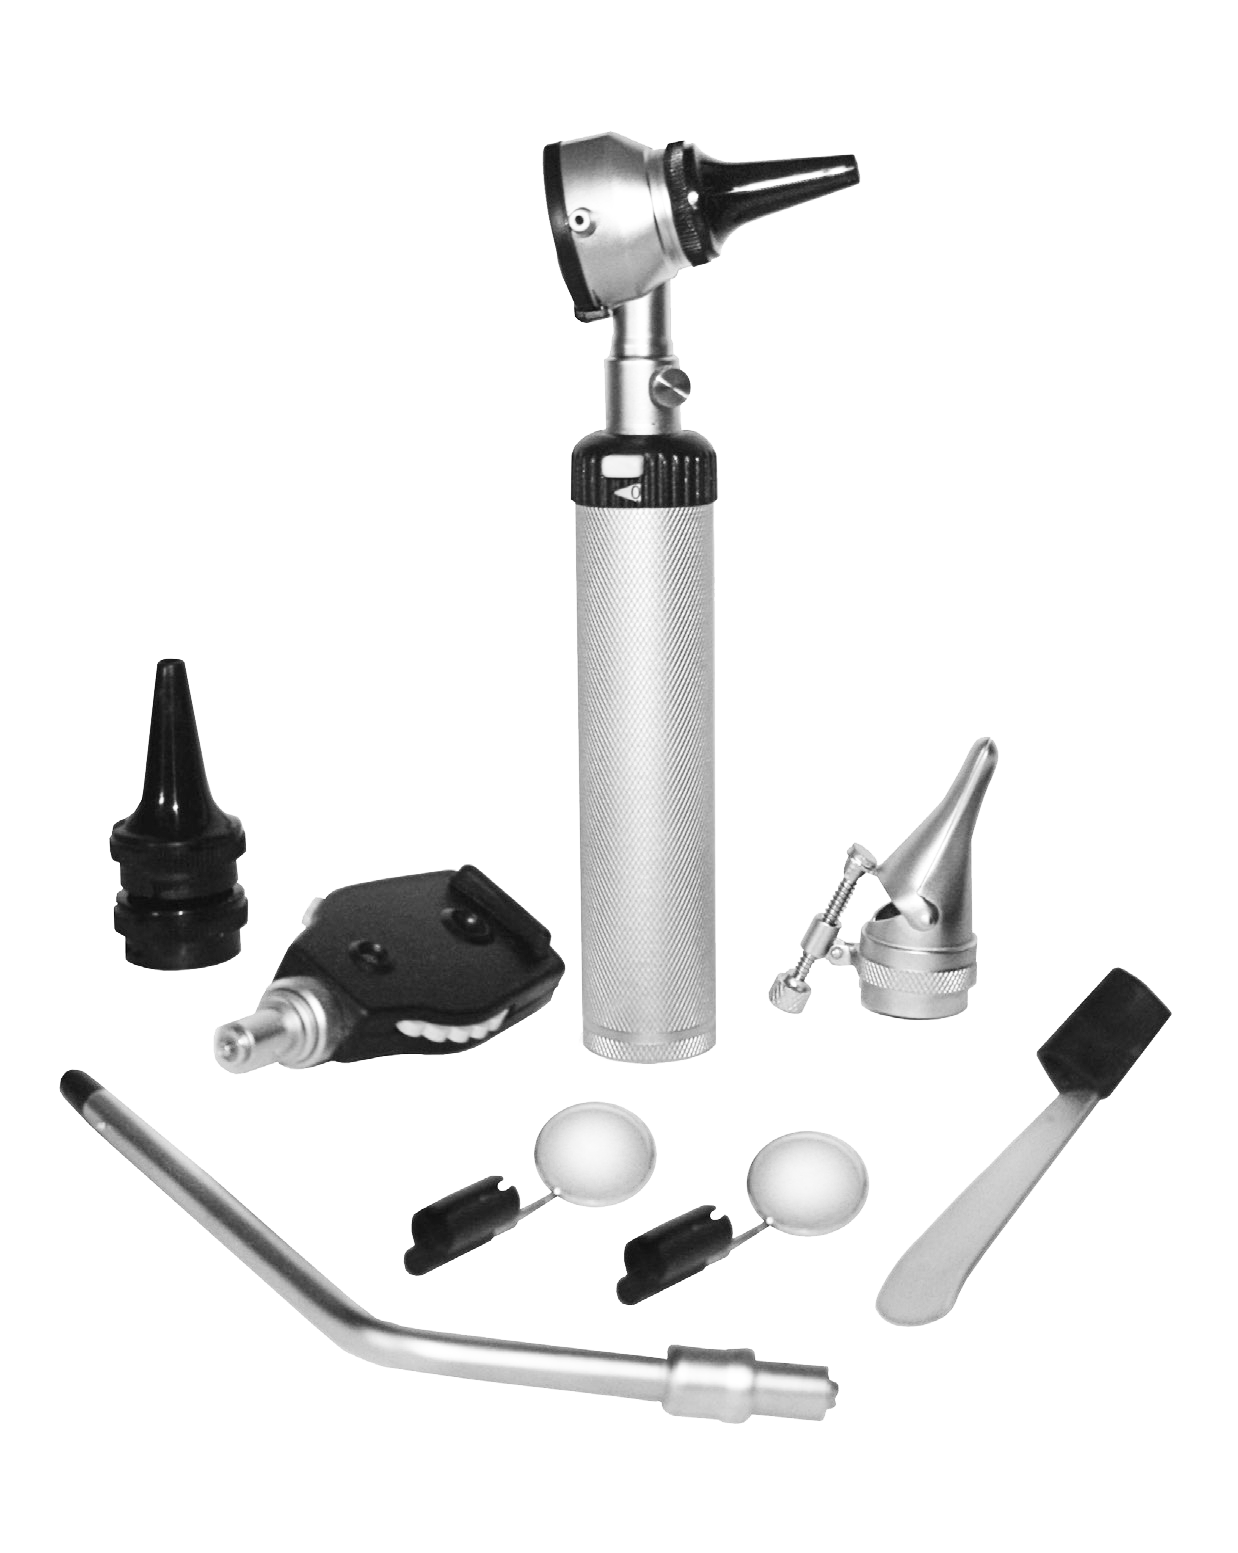 KaWe Ears, Nose, and Throat (ENT) Otoscope and Ophthalmoscope Set